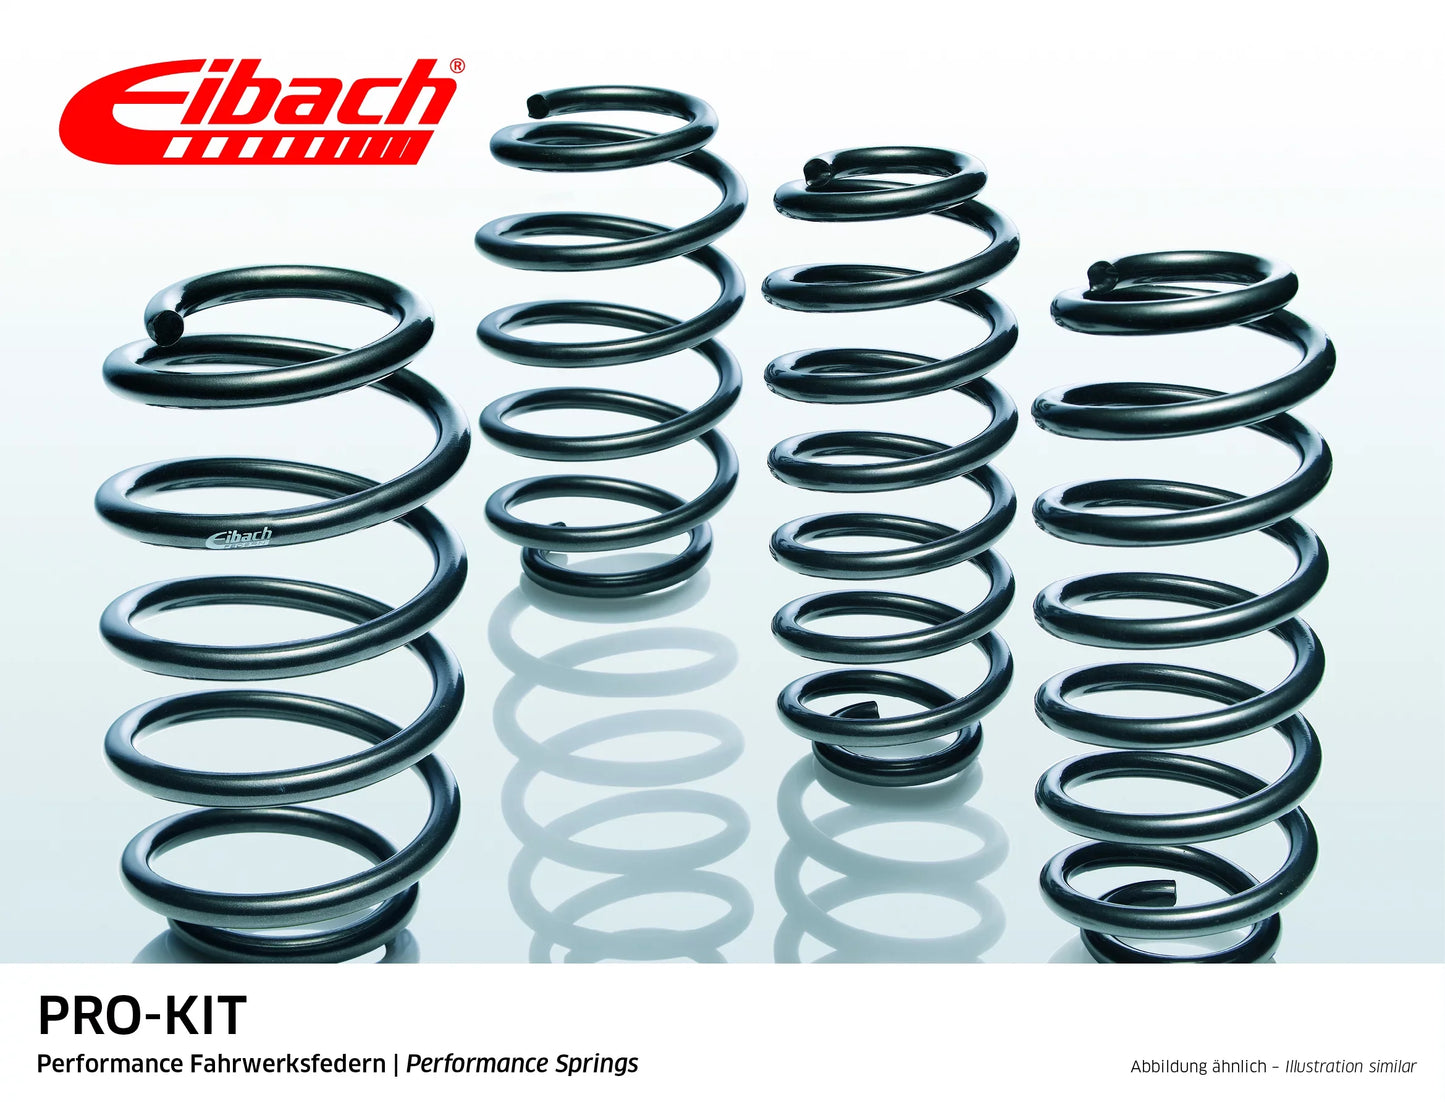 Eibach Pro-Kit Lowering Springs (E10-82-016-03-22) at £276.05